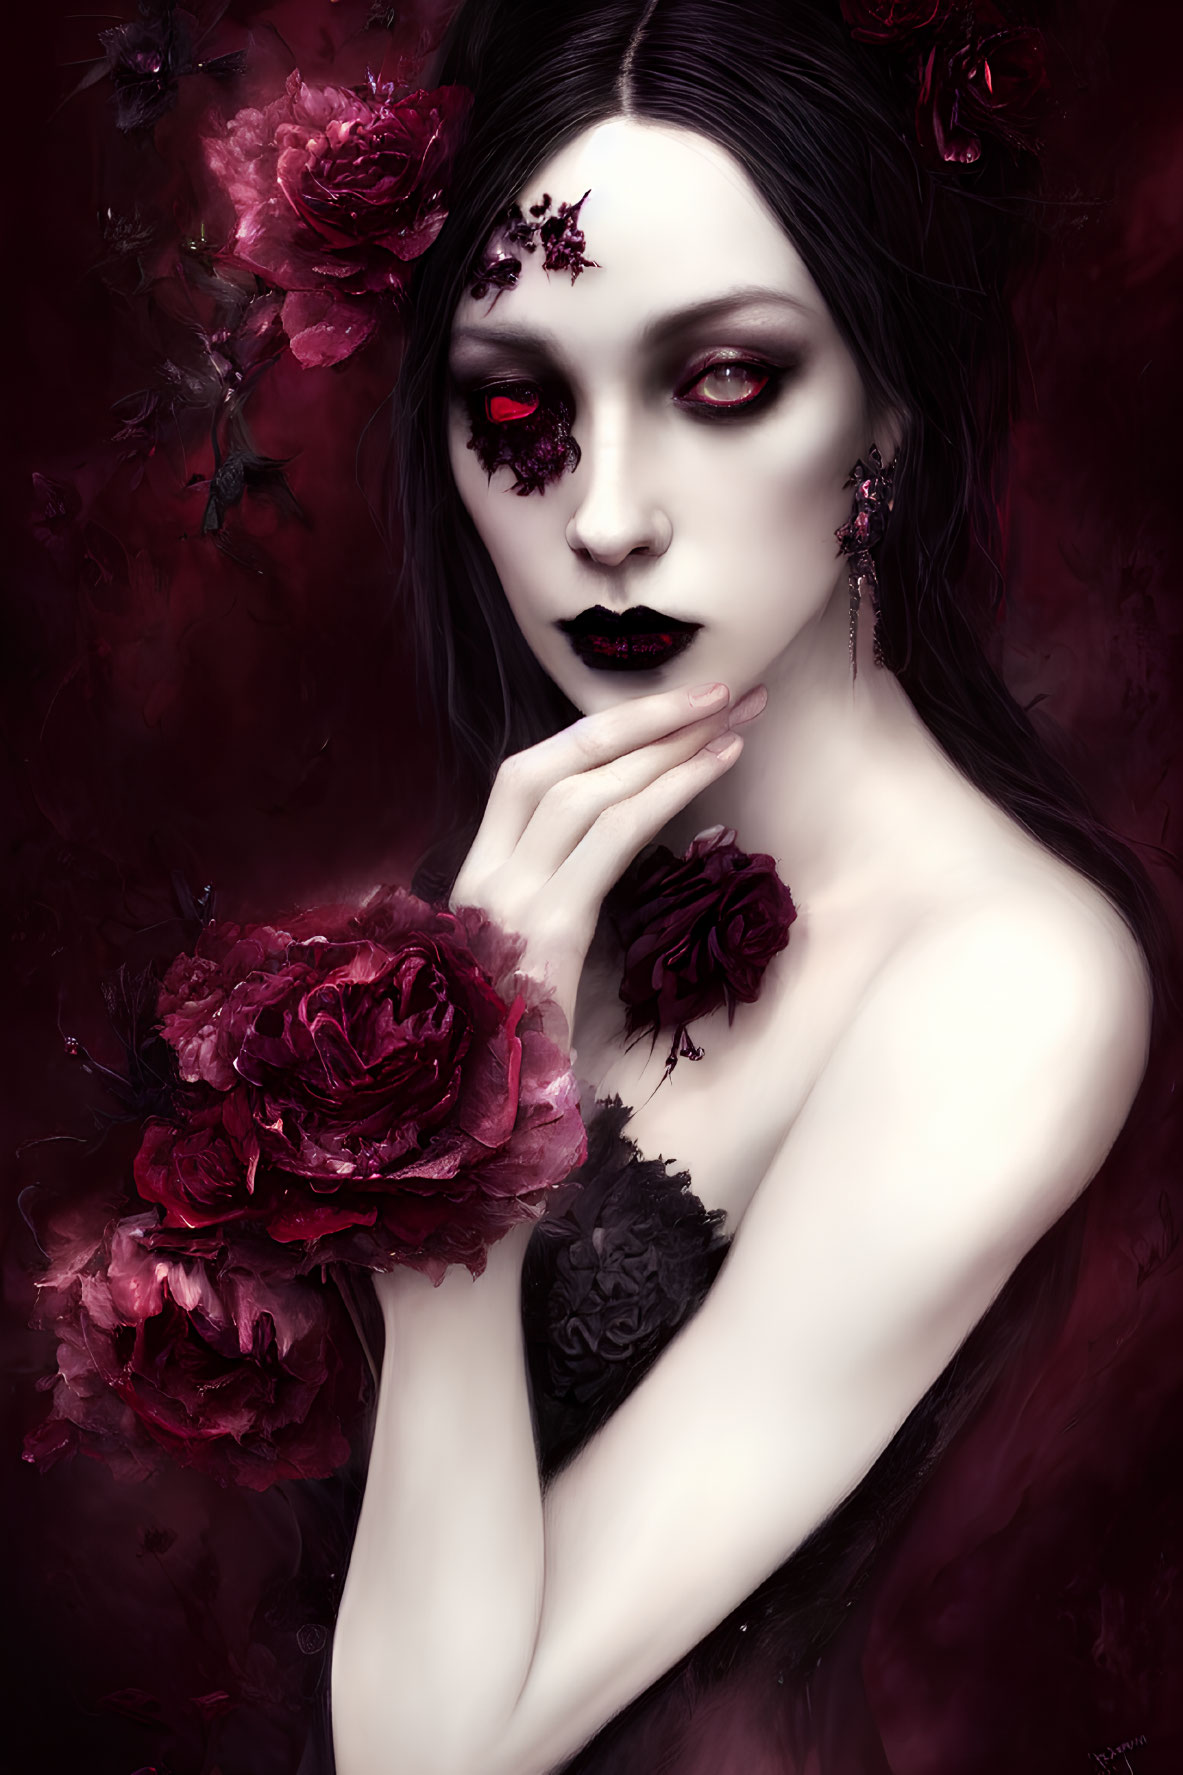 Gothic-inspired artwork of woman with red eyes and roses on deep red background